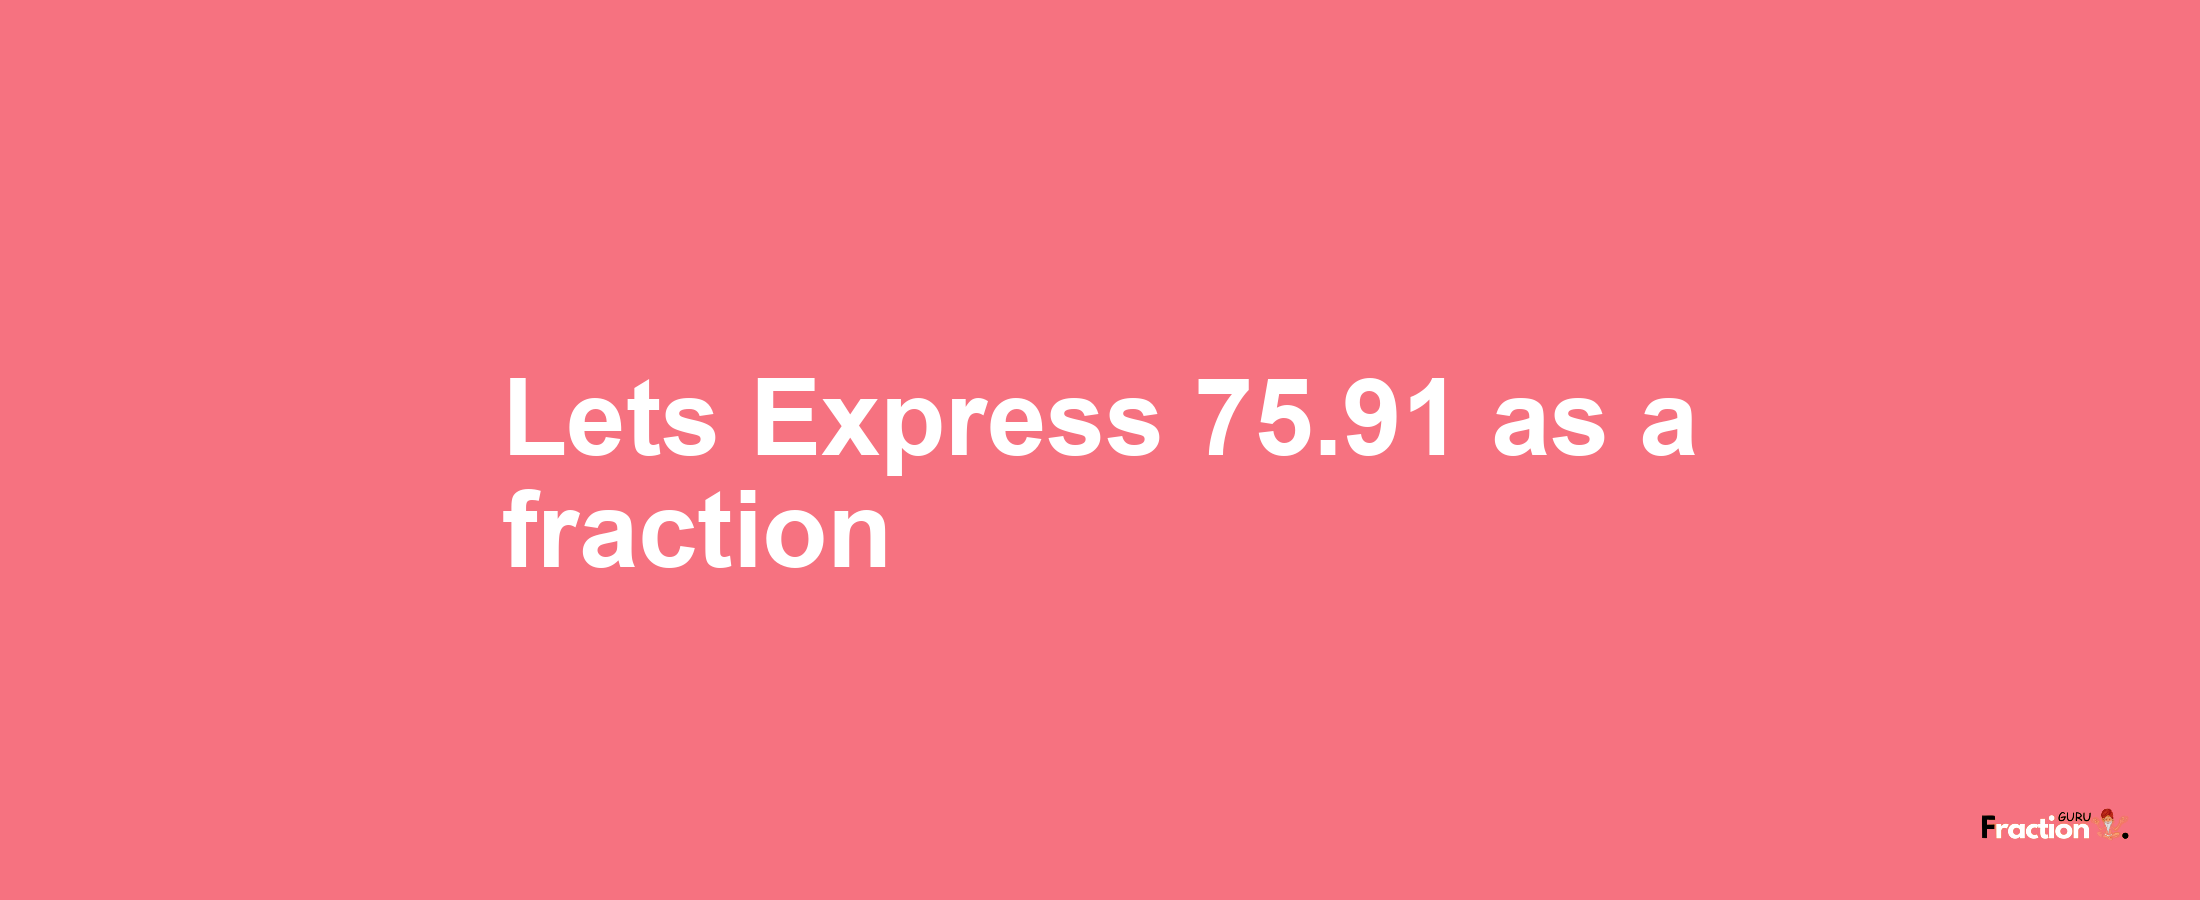 Lets Express 75.91 as afraction